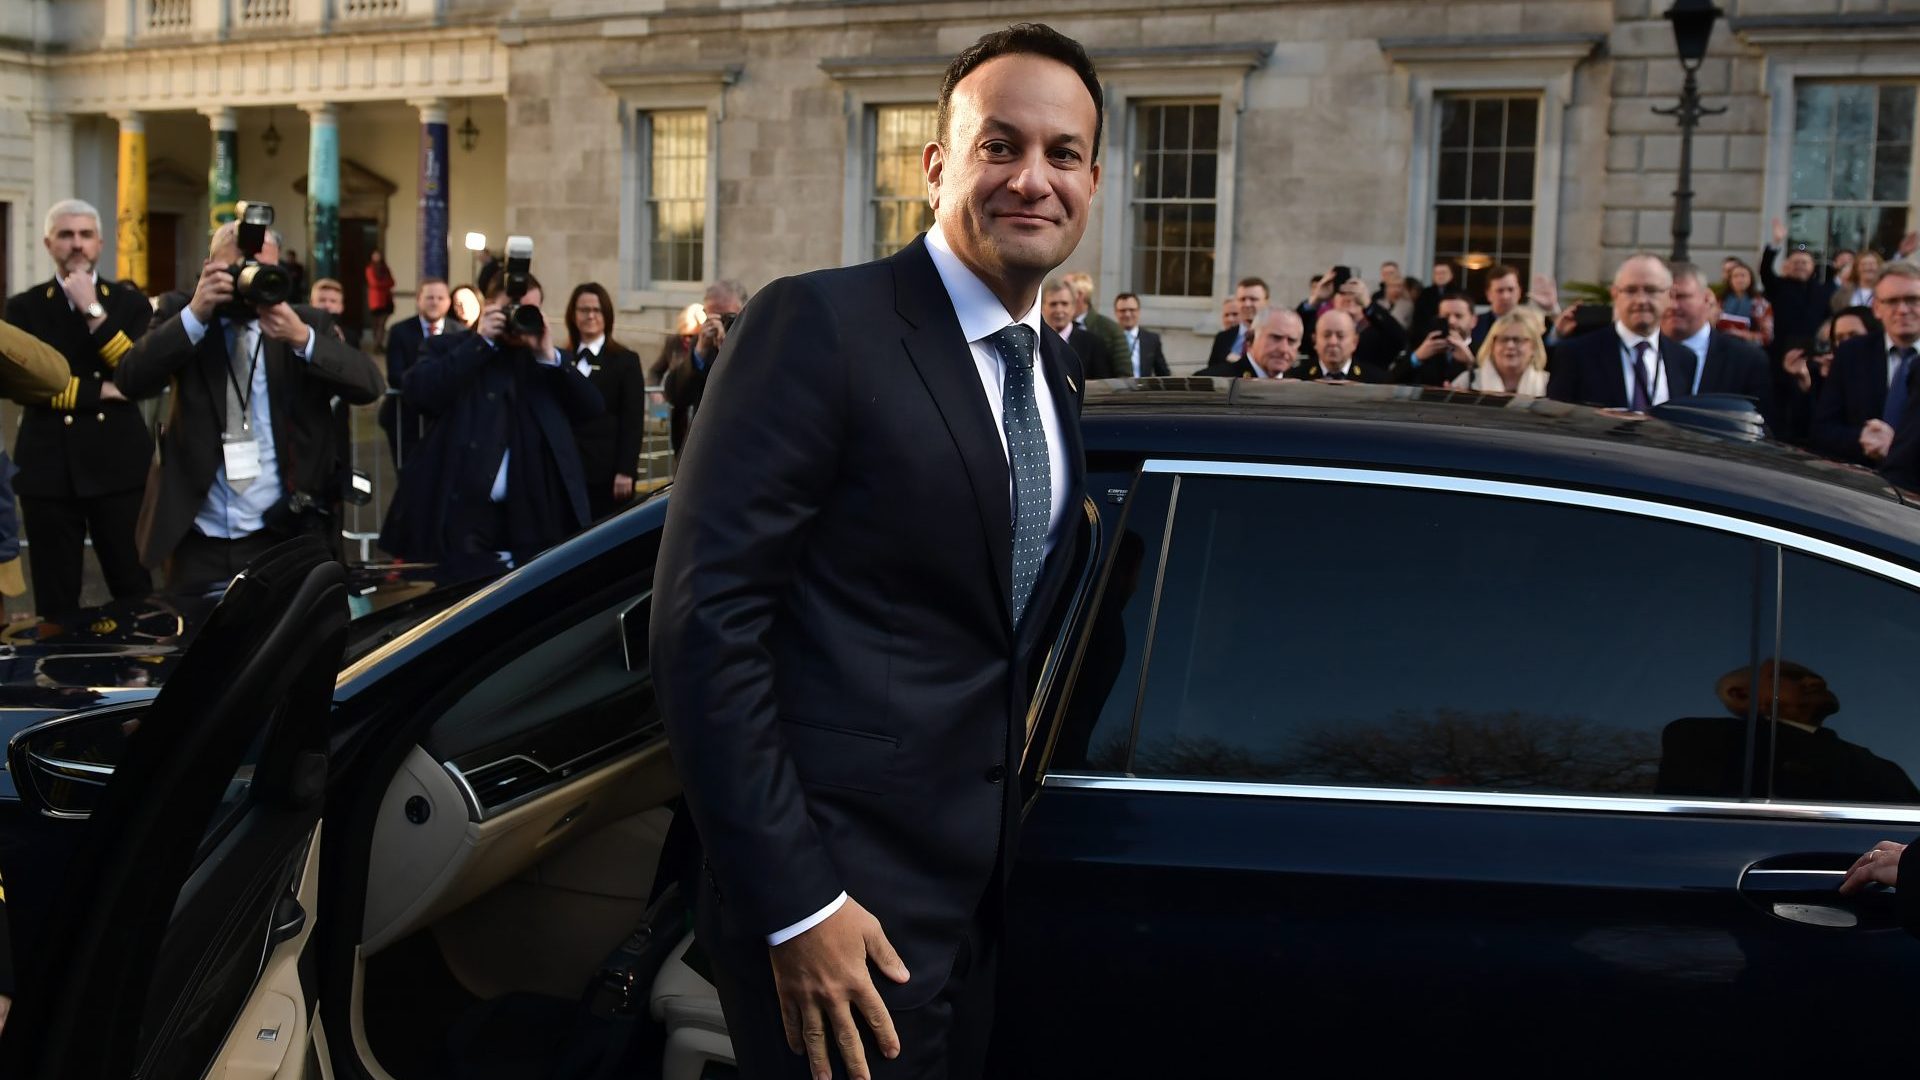 Fine Gael leader Leo Varadkar pictured as he is congratulated by party members after being nominated as Taoiseach at Leinster House on December 17, 2022. Photo: Charles McQuillan/Getty Images